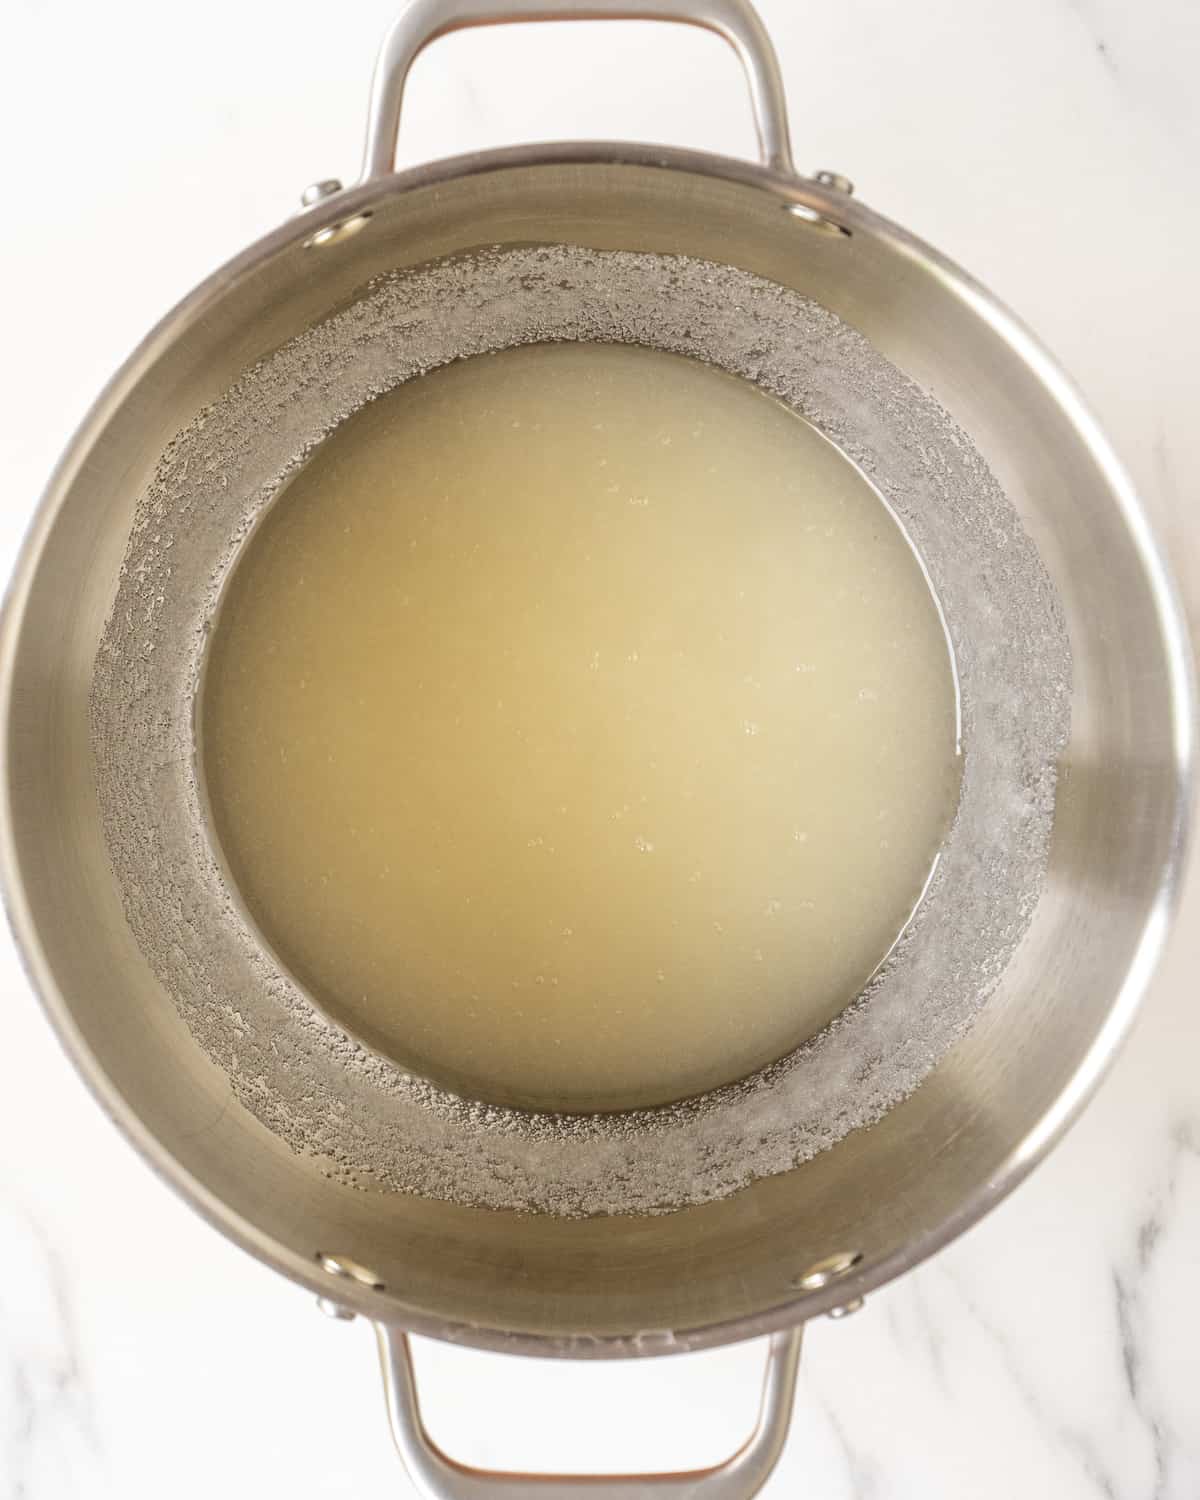 A stand mixer bowl with a mixture of oil and sugar